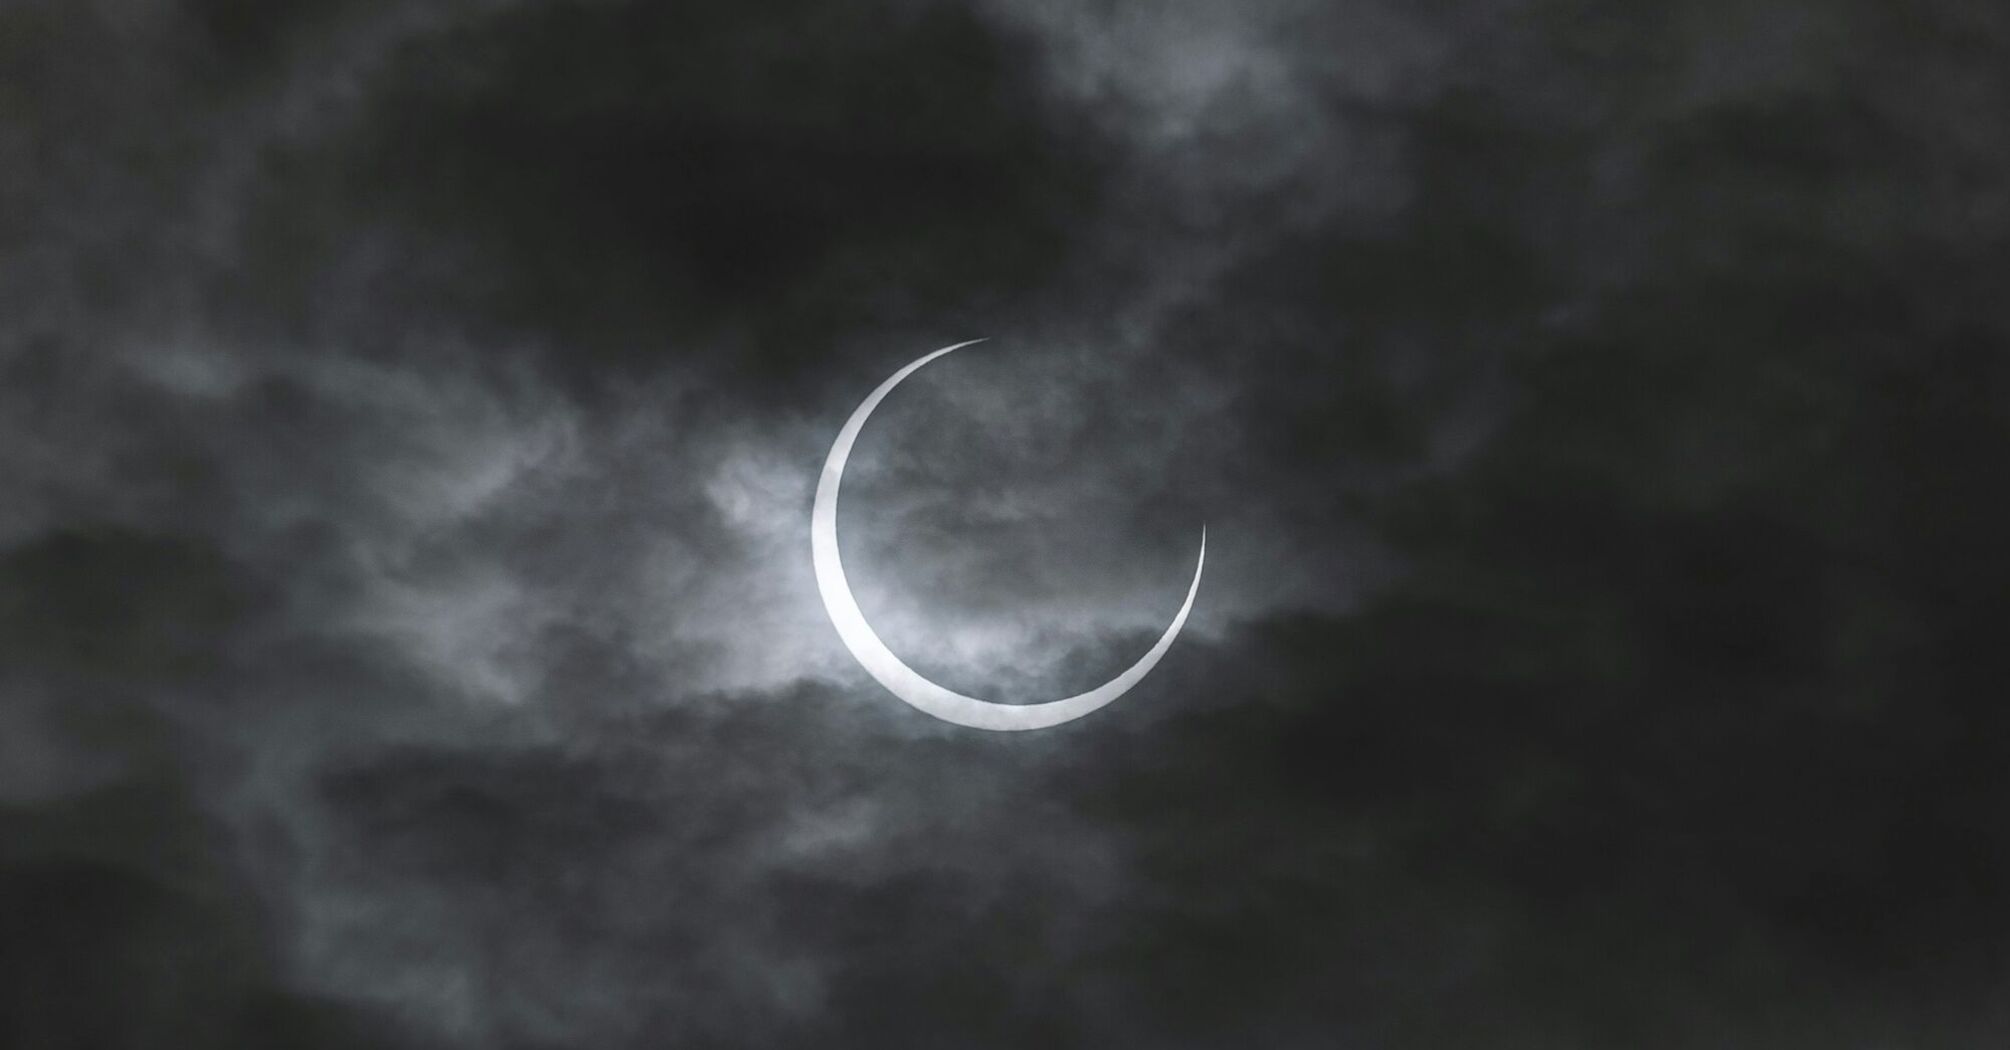 Our star being eclipsed by our moon during an annular eclipse